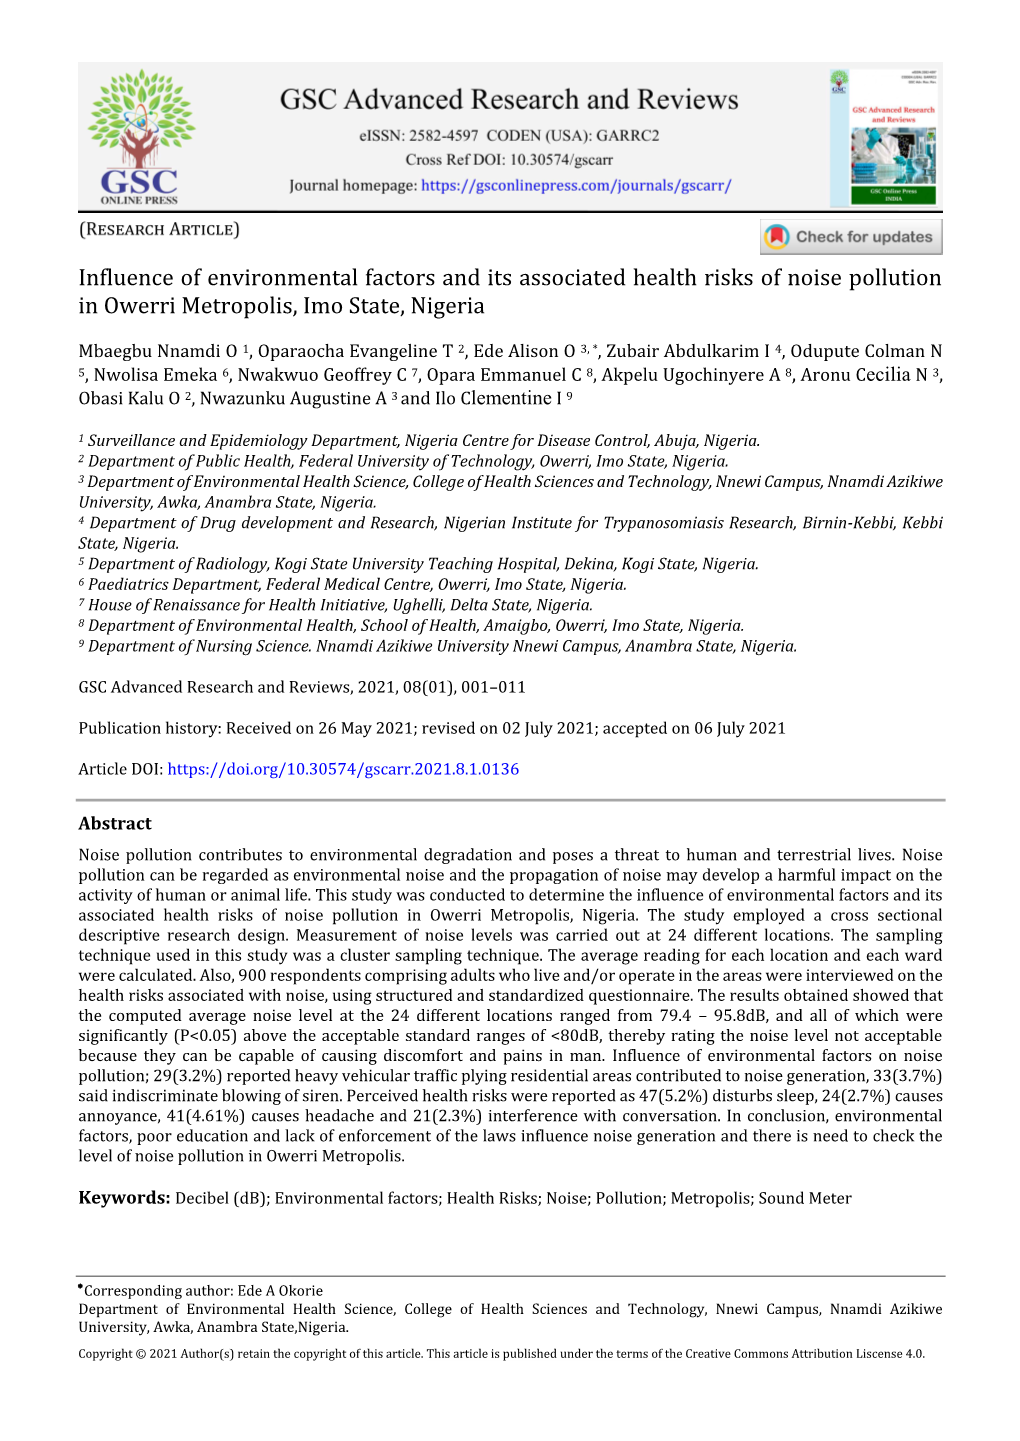 Influence of Environmental Factors and Its Associated Health Risks of Noise Pollution in Owerri Metropolis, Imo State, Nigeria